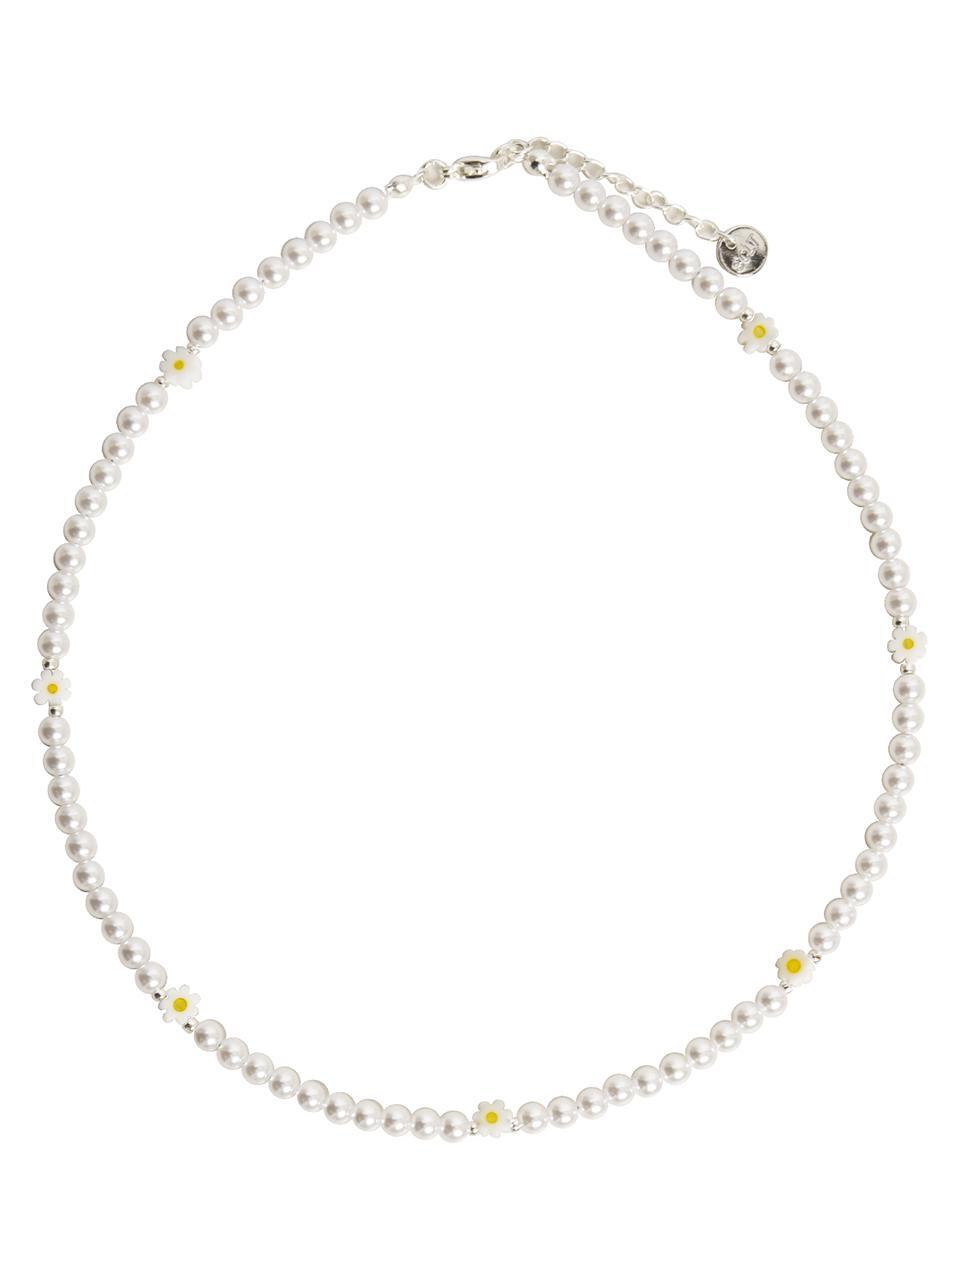 WIL202 Daisy PearlBeads Necklace